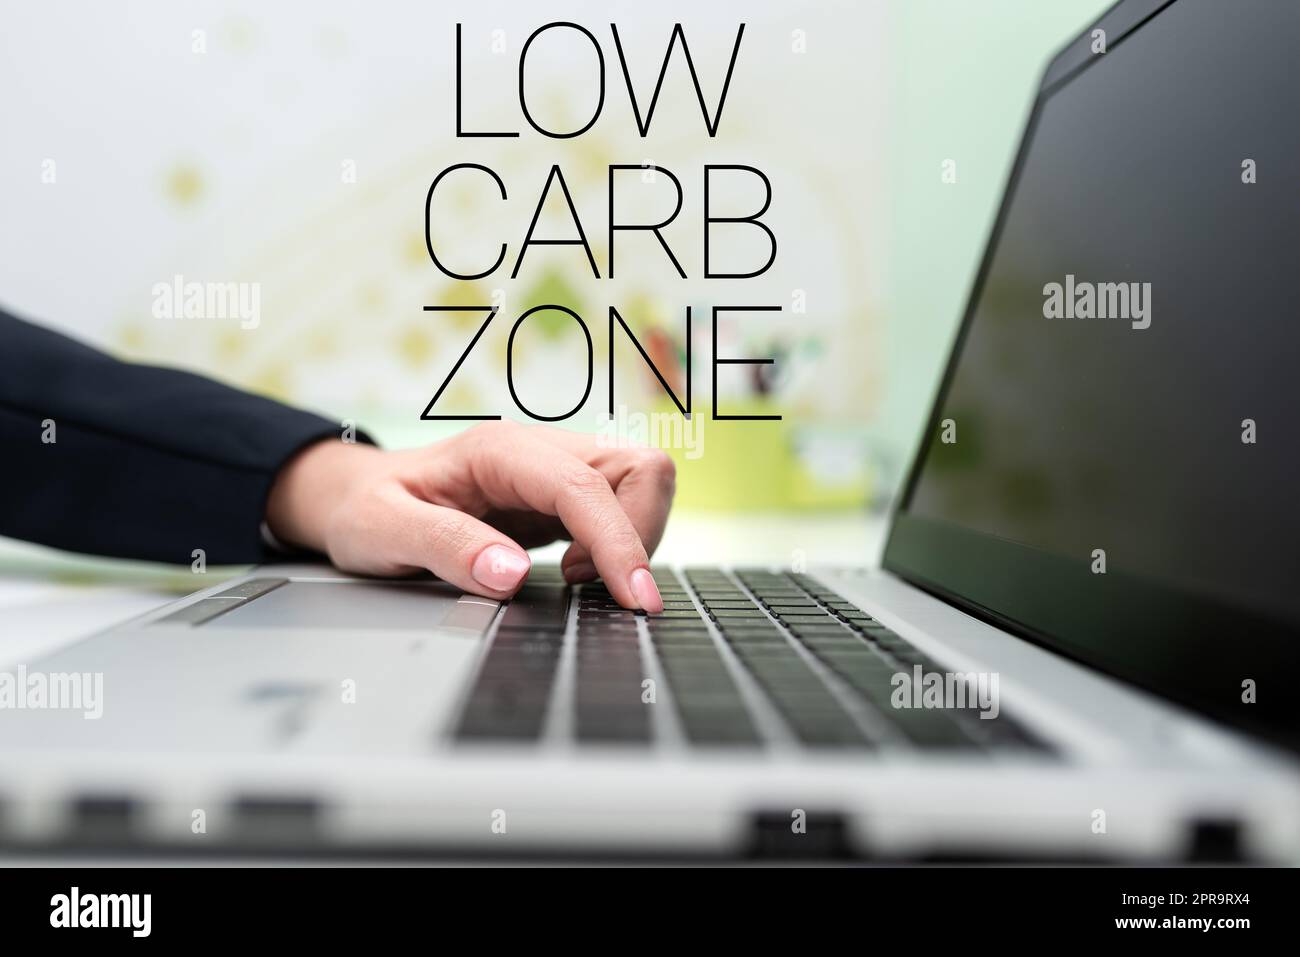 Writing displaying text Low Carb Zone. Internet Concept Healthy diet for losing weight eating more proteins sugar free Businesswoman Typing Recent Updates On Lap Top Keyboard On Desk. Stock Photo